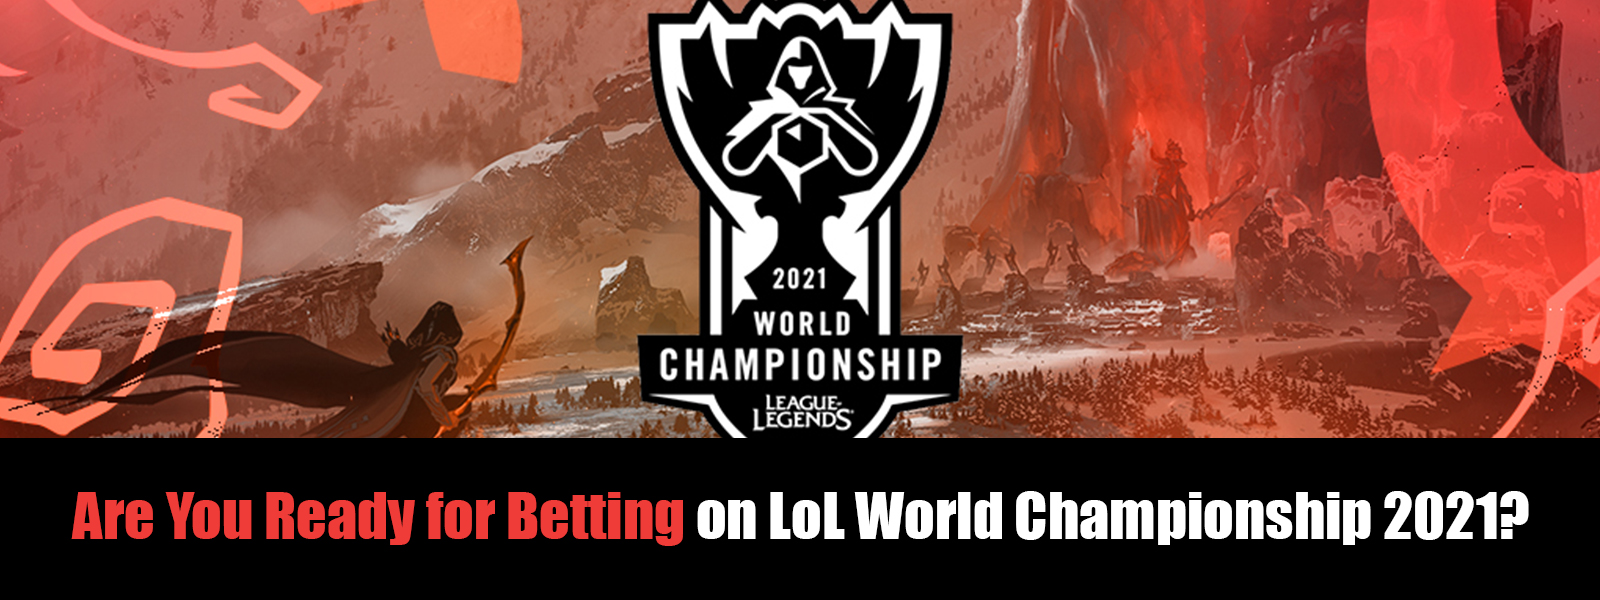 Are You Ready To Bet On LoL World Championship 2021?